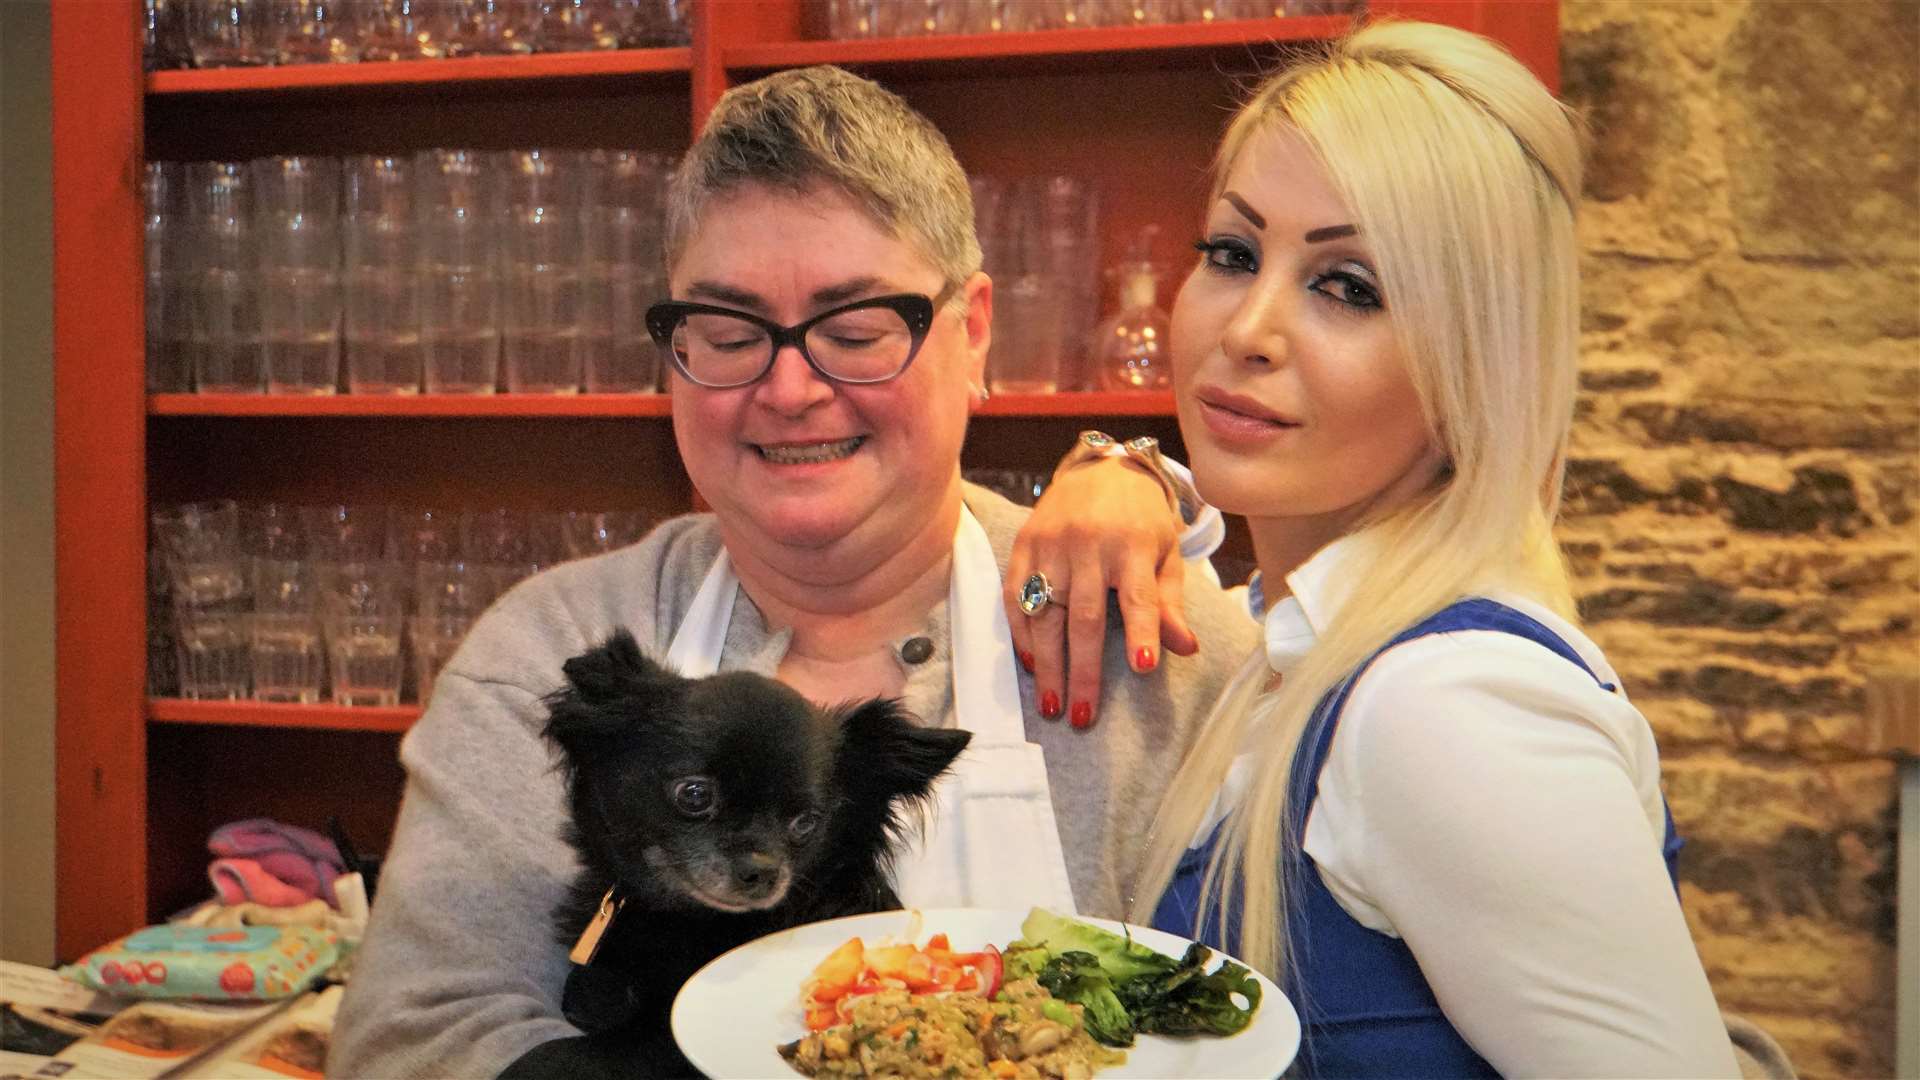 Louis the chihuahua has his eyes firmly on the tasty vegan dish Natalie is holding.